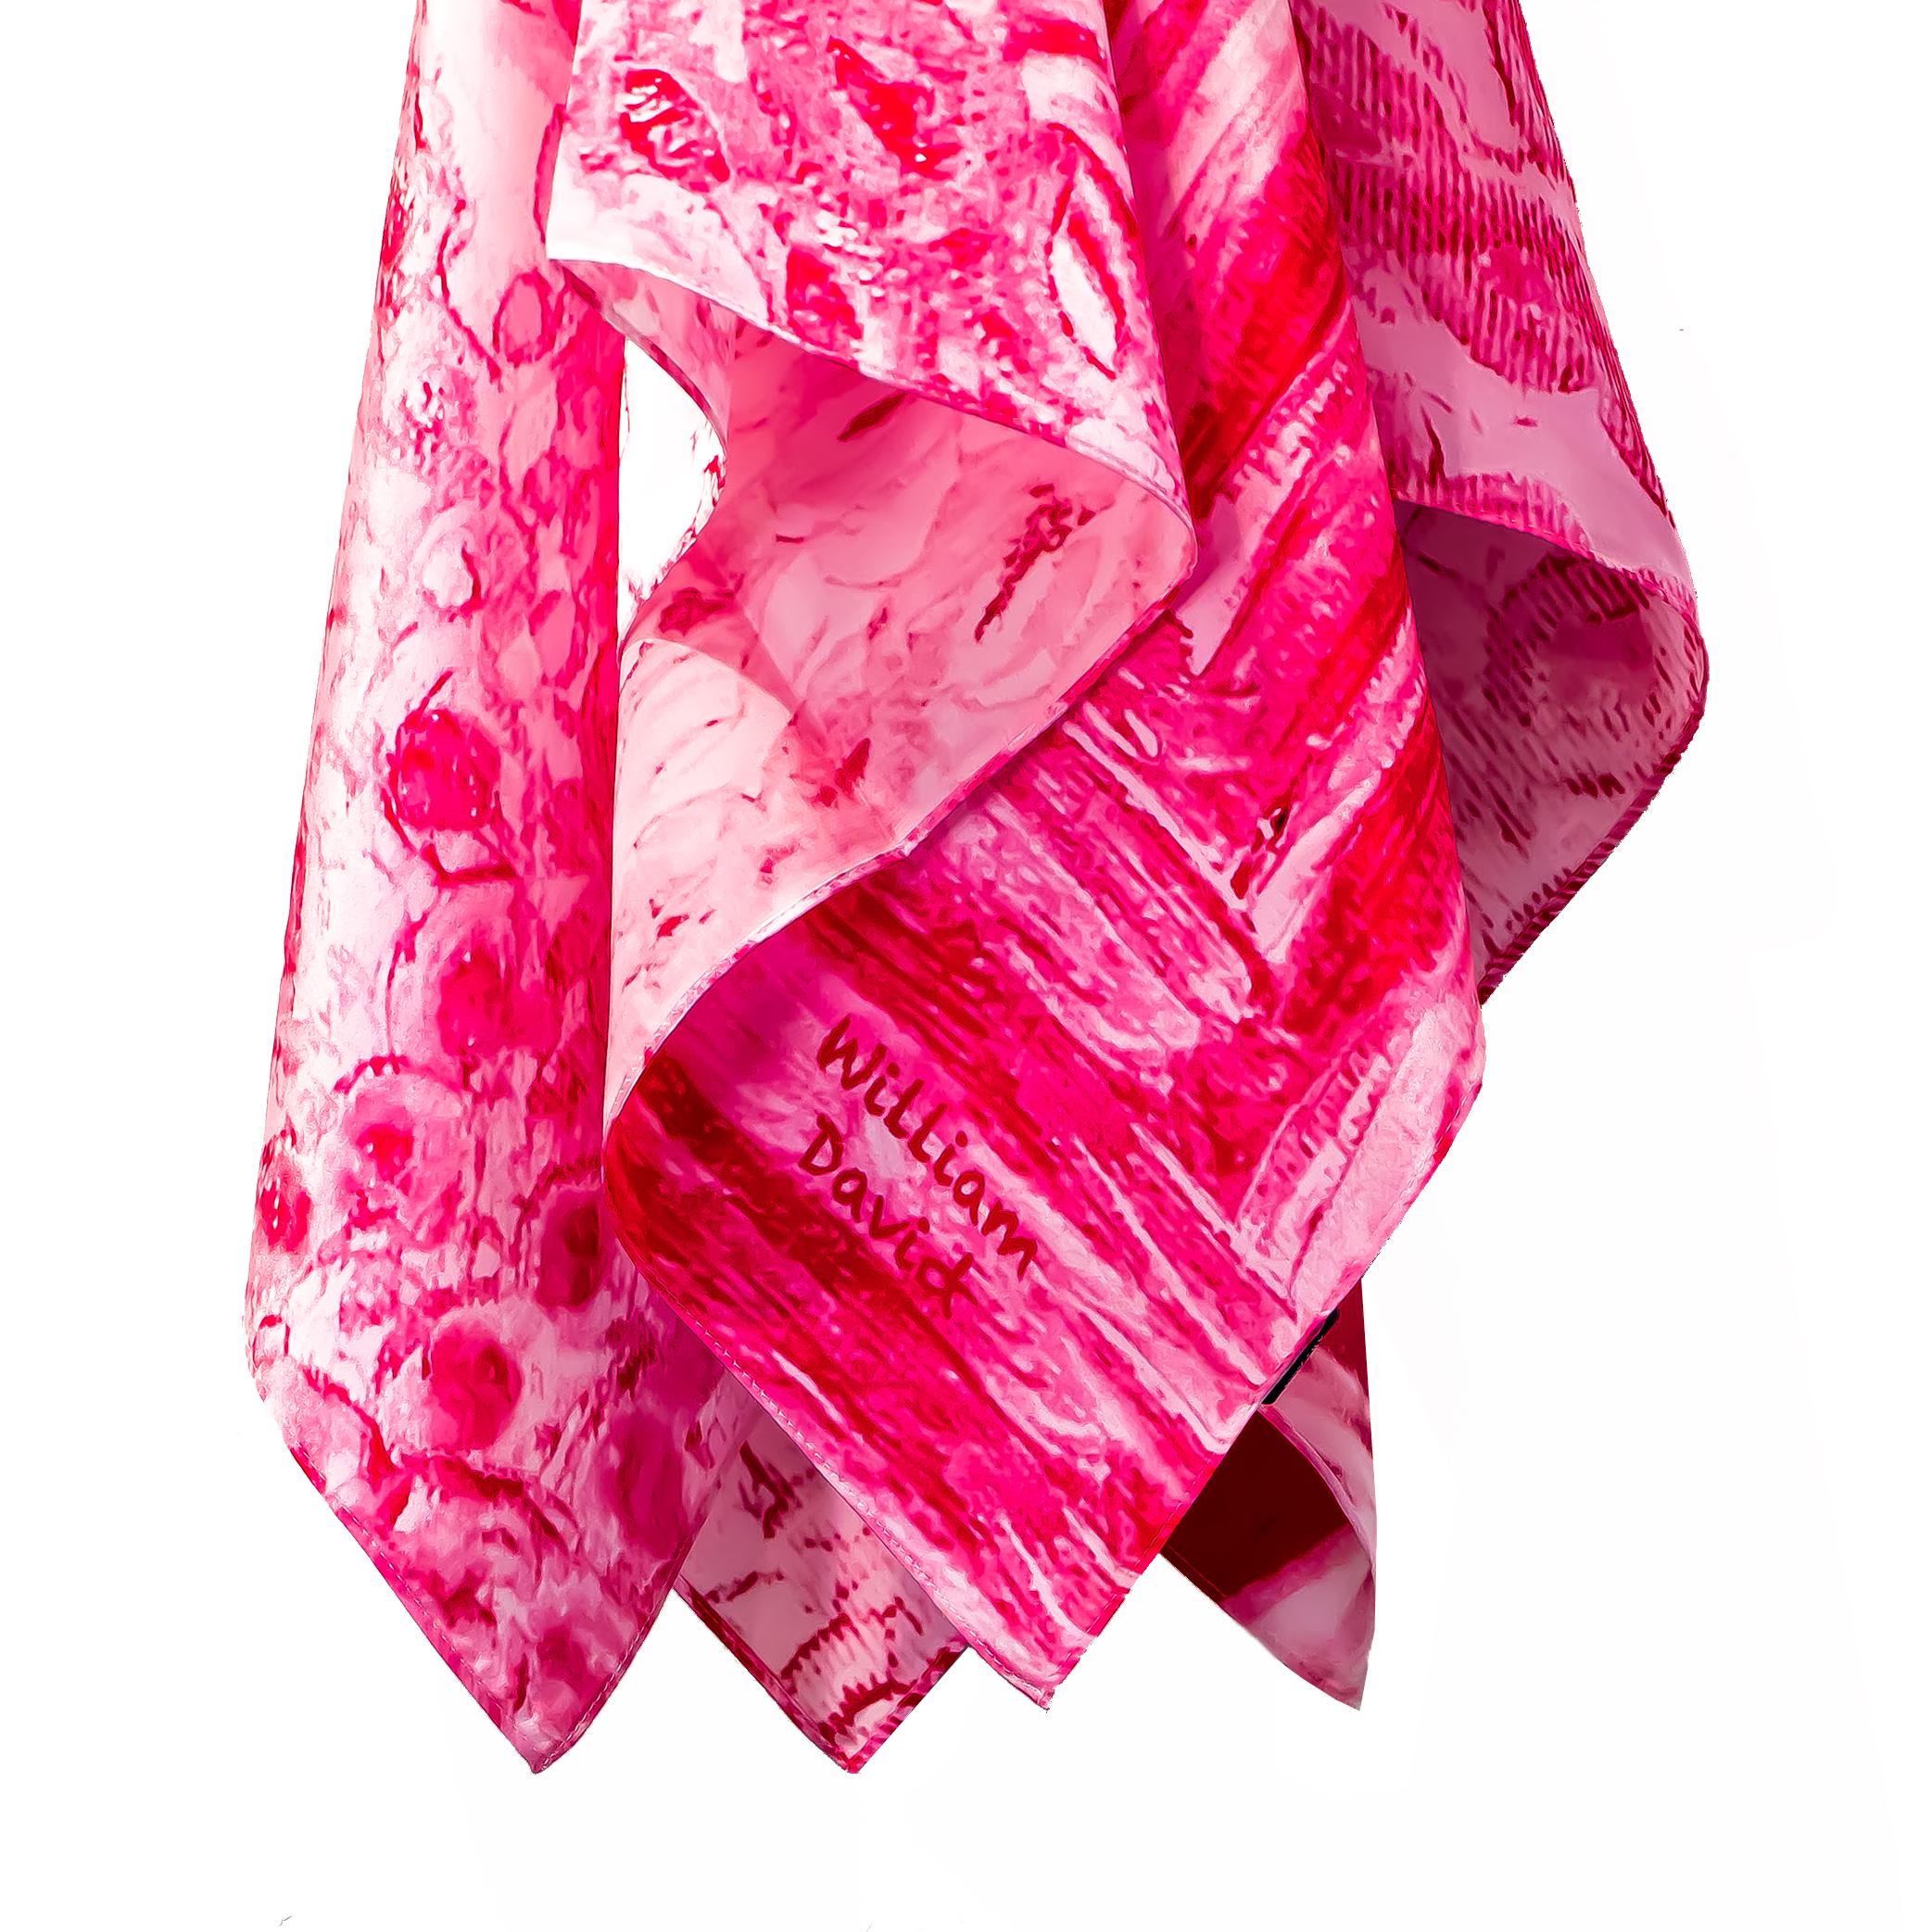 For the artistic, creative fashion lover, this oil painting-inspired silk scarf is the essential wardrobe staple. Diverse in color, and unique in pattern, this distinctive accessory is part of a collection of only 100 - each signed by William David